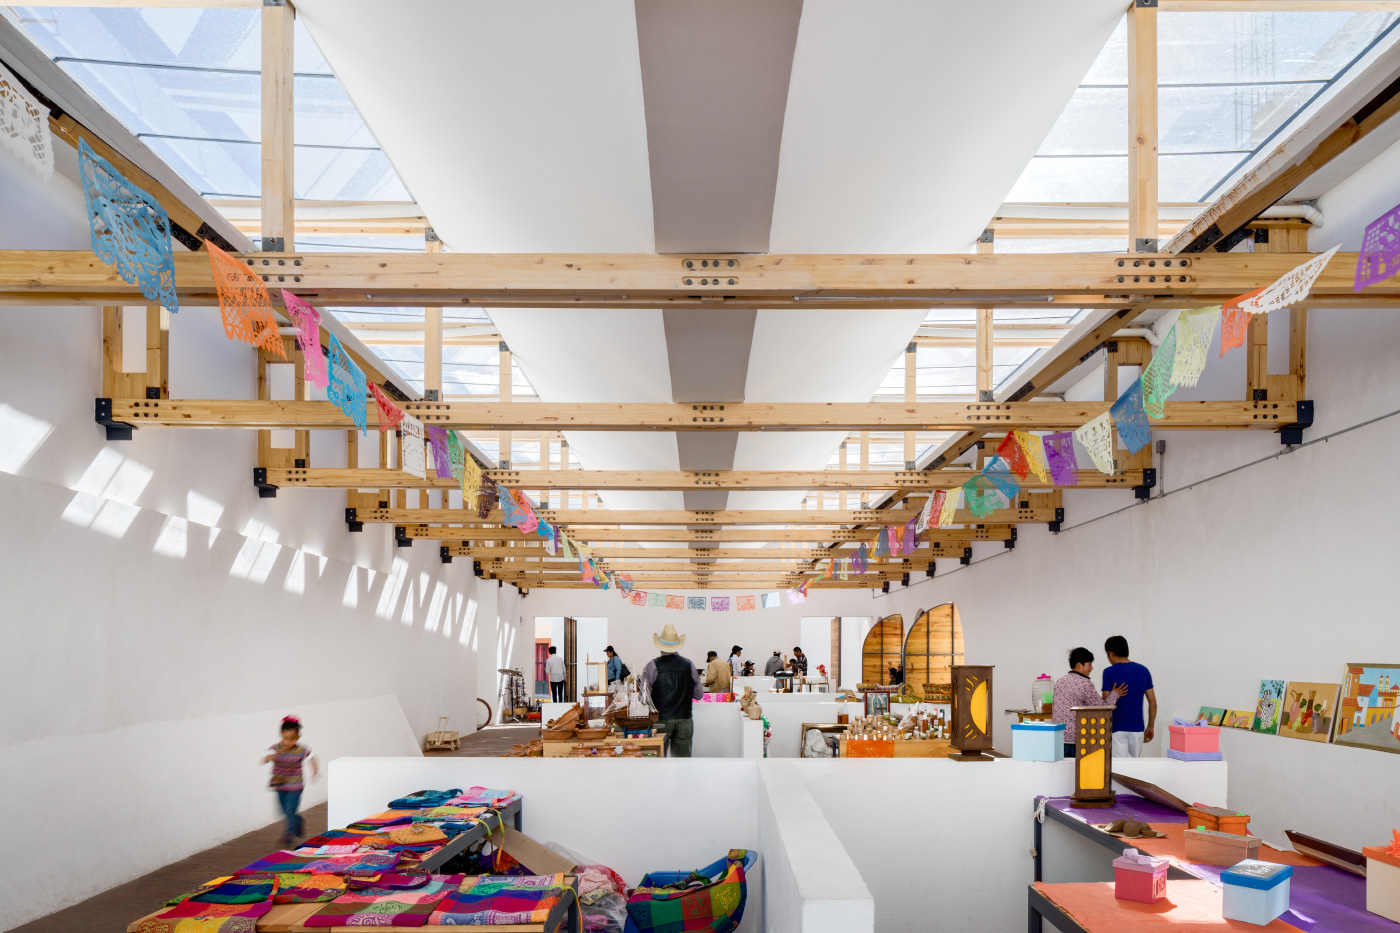 An open-air market hall designed by Architectural League Prize winner Vrtical